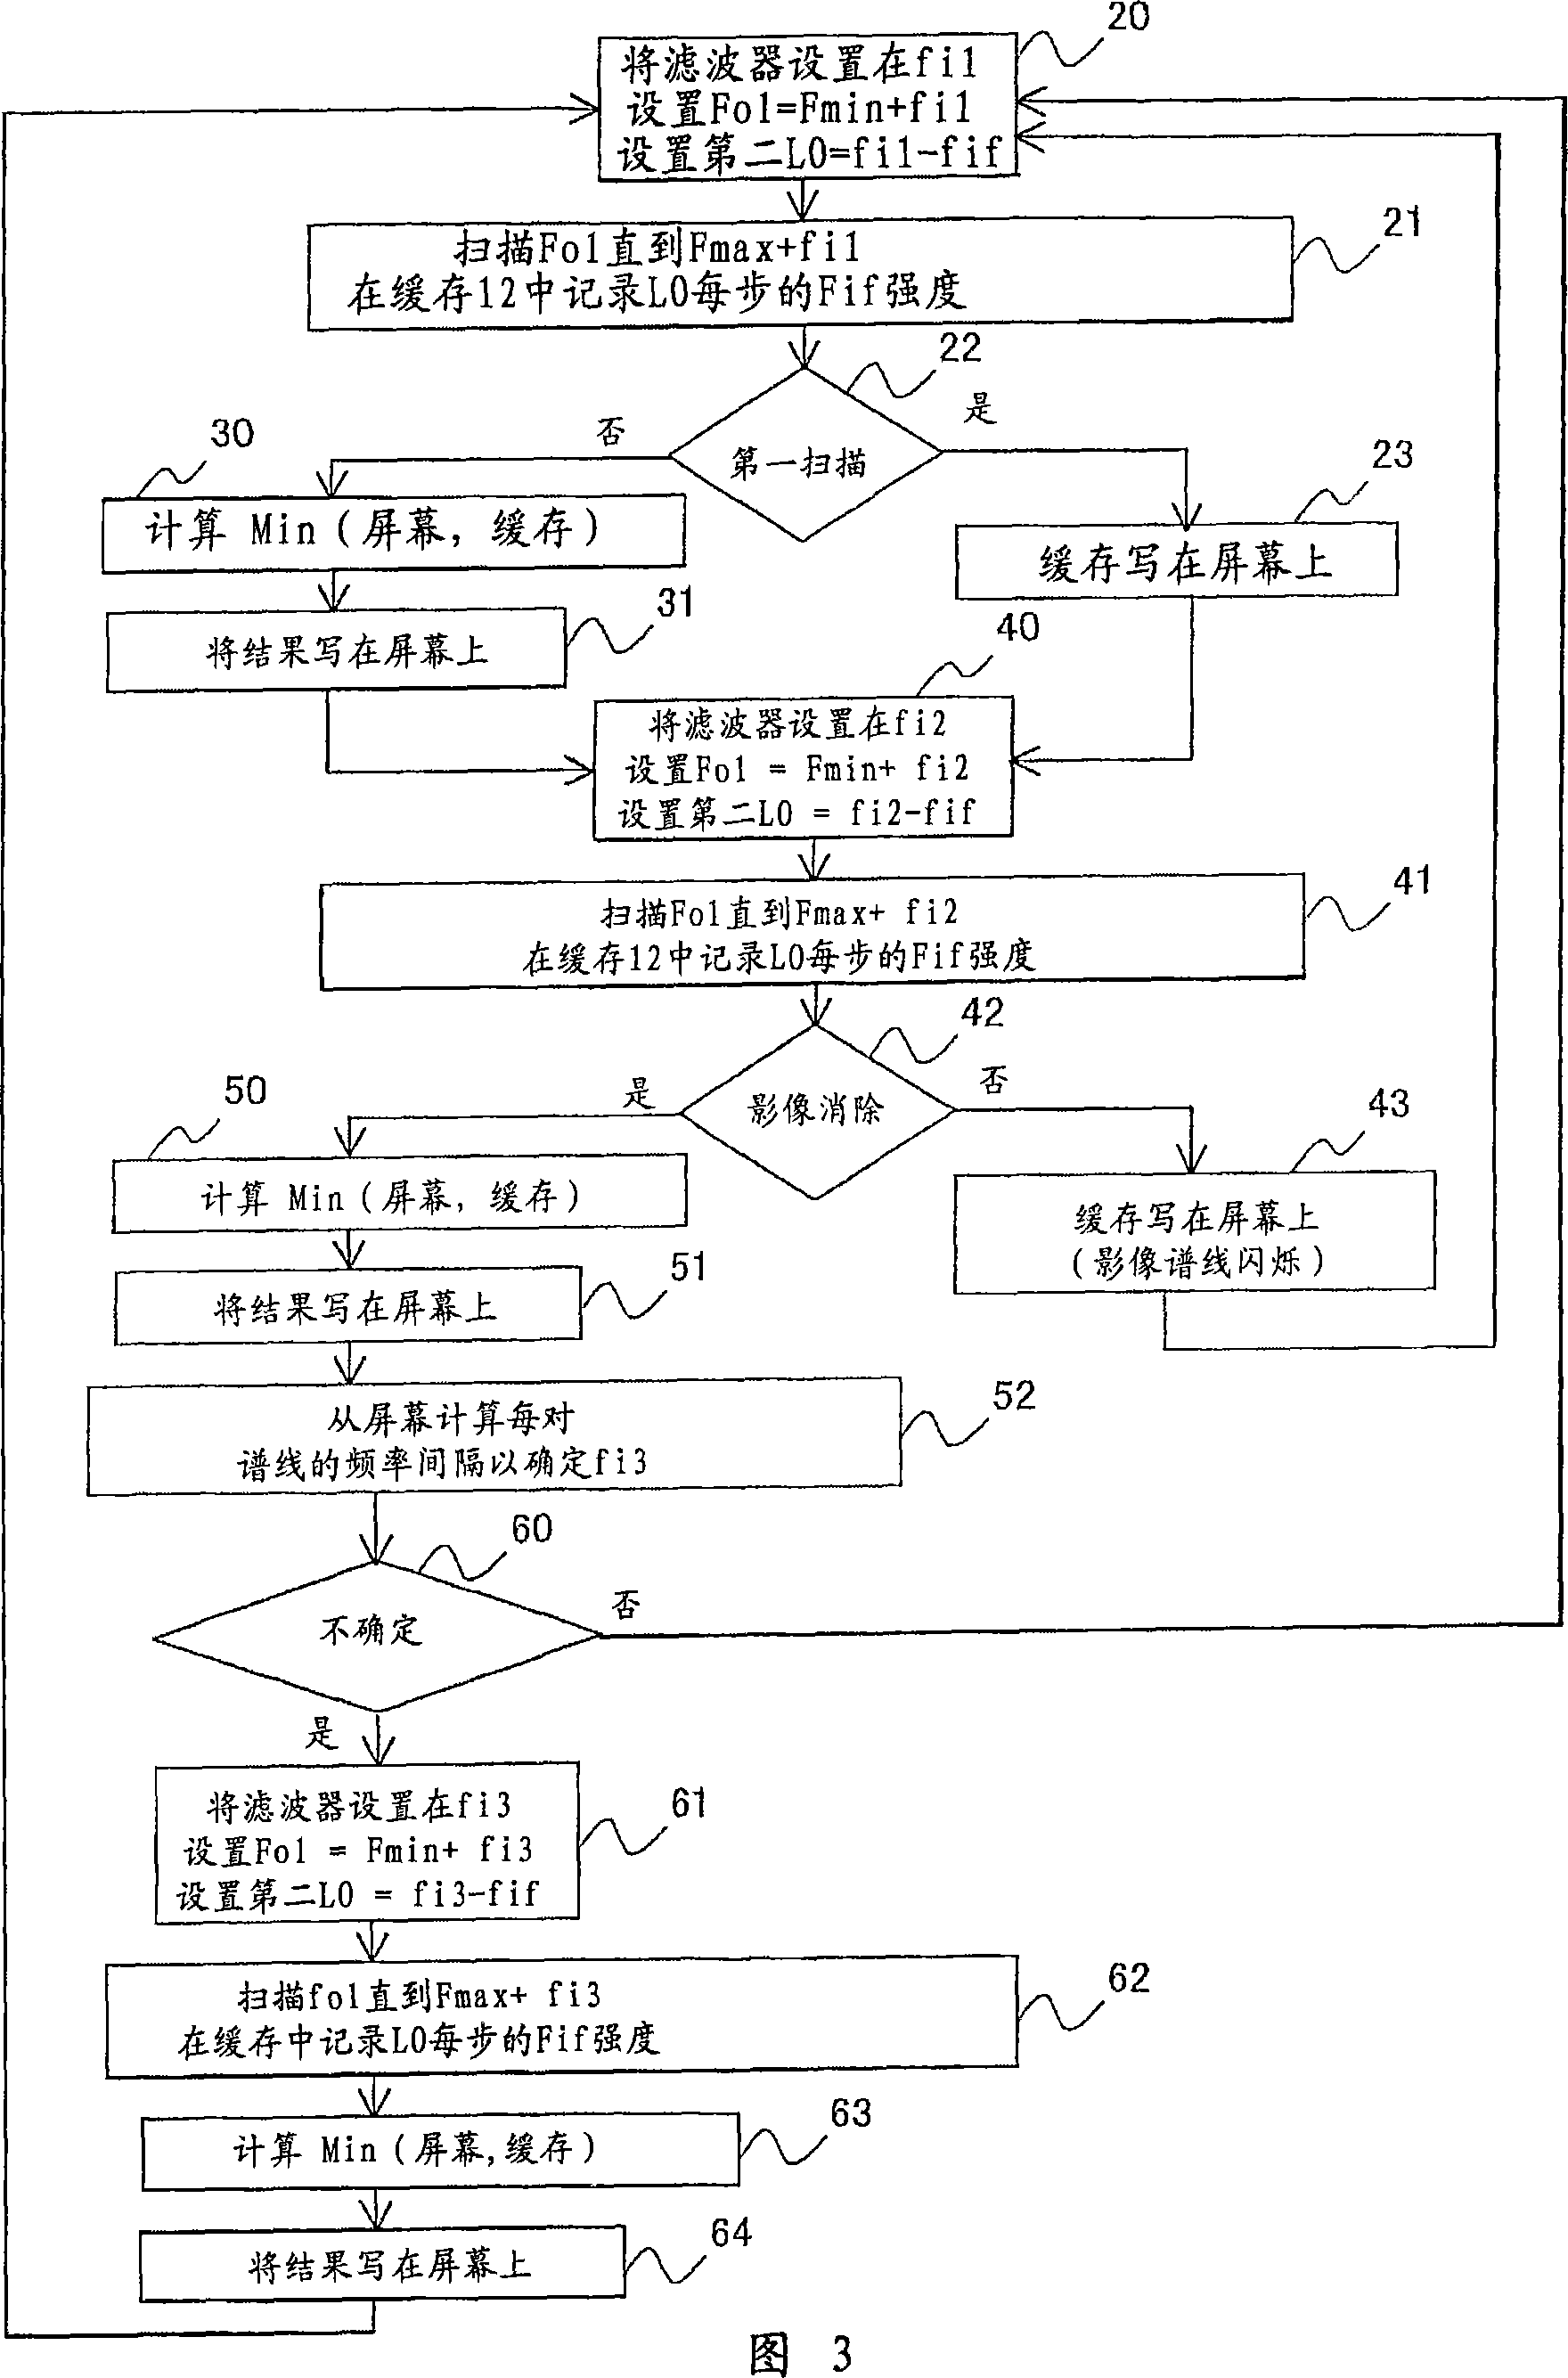 Image cancellation in frequency converters for spectrum analysers